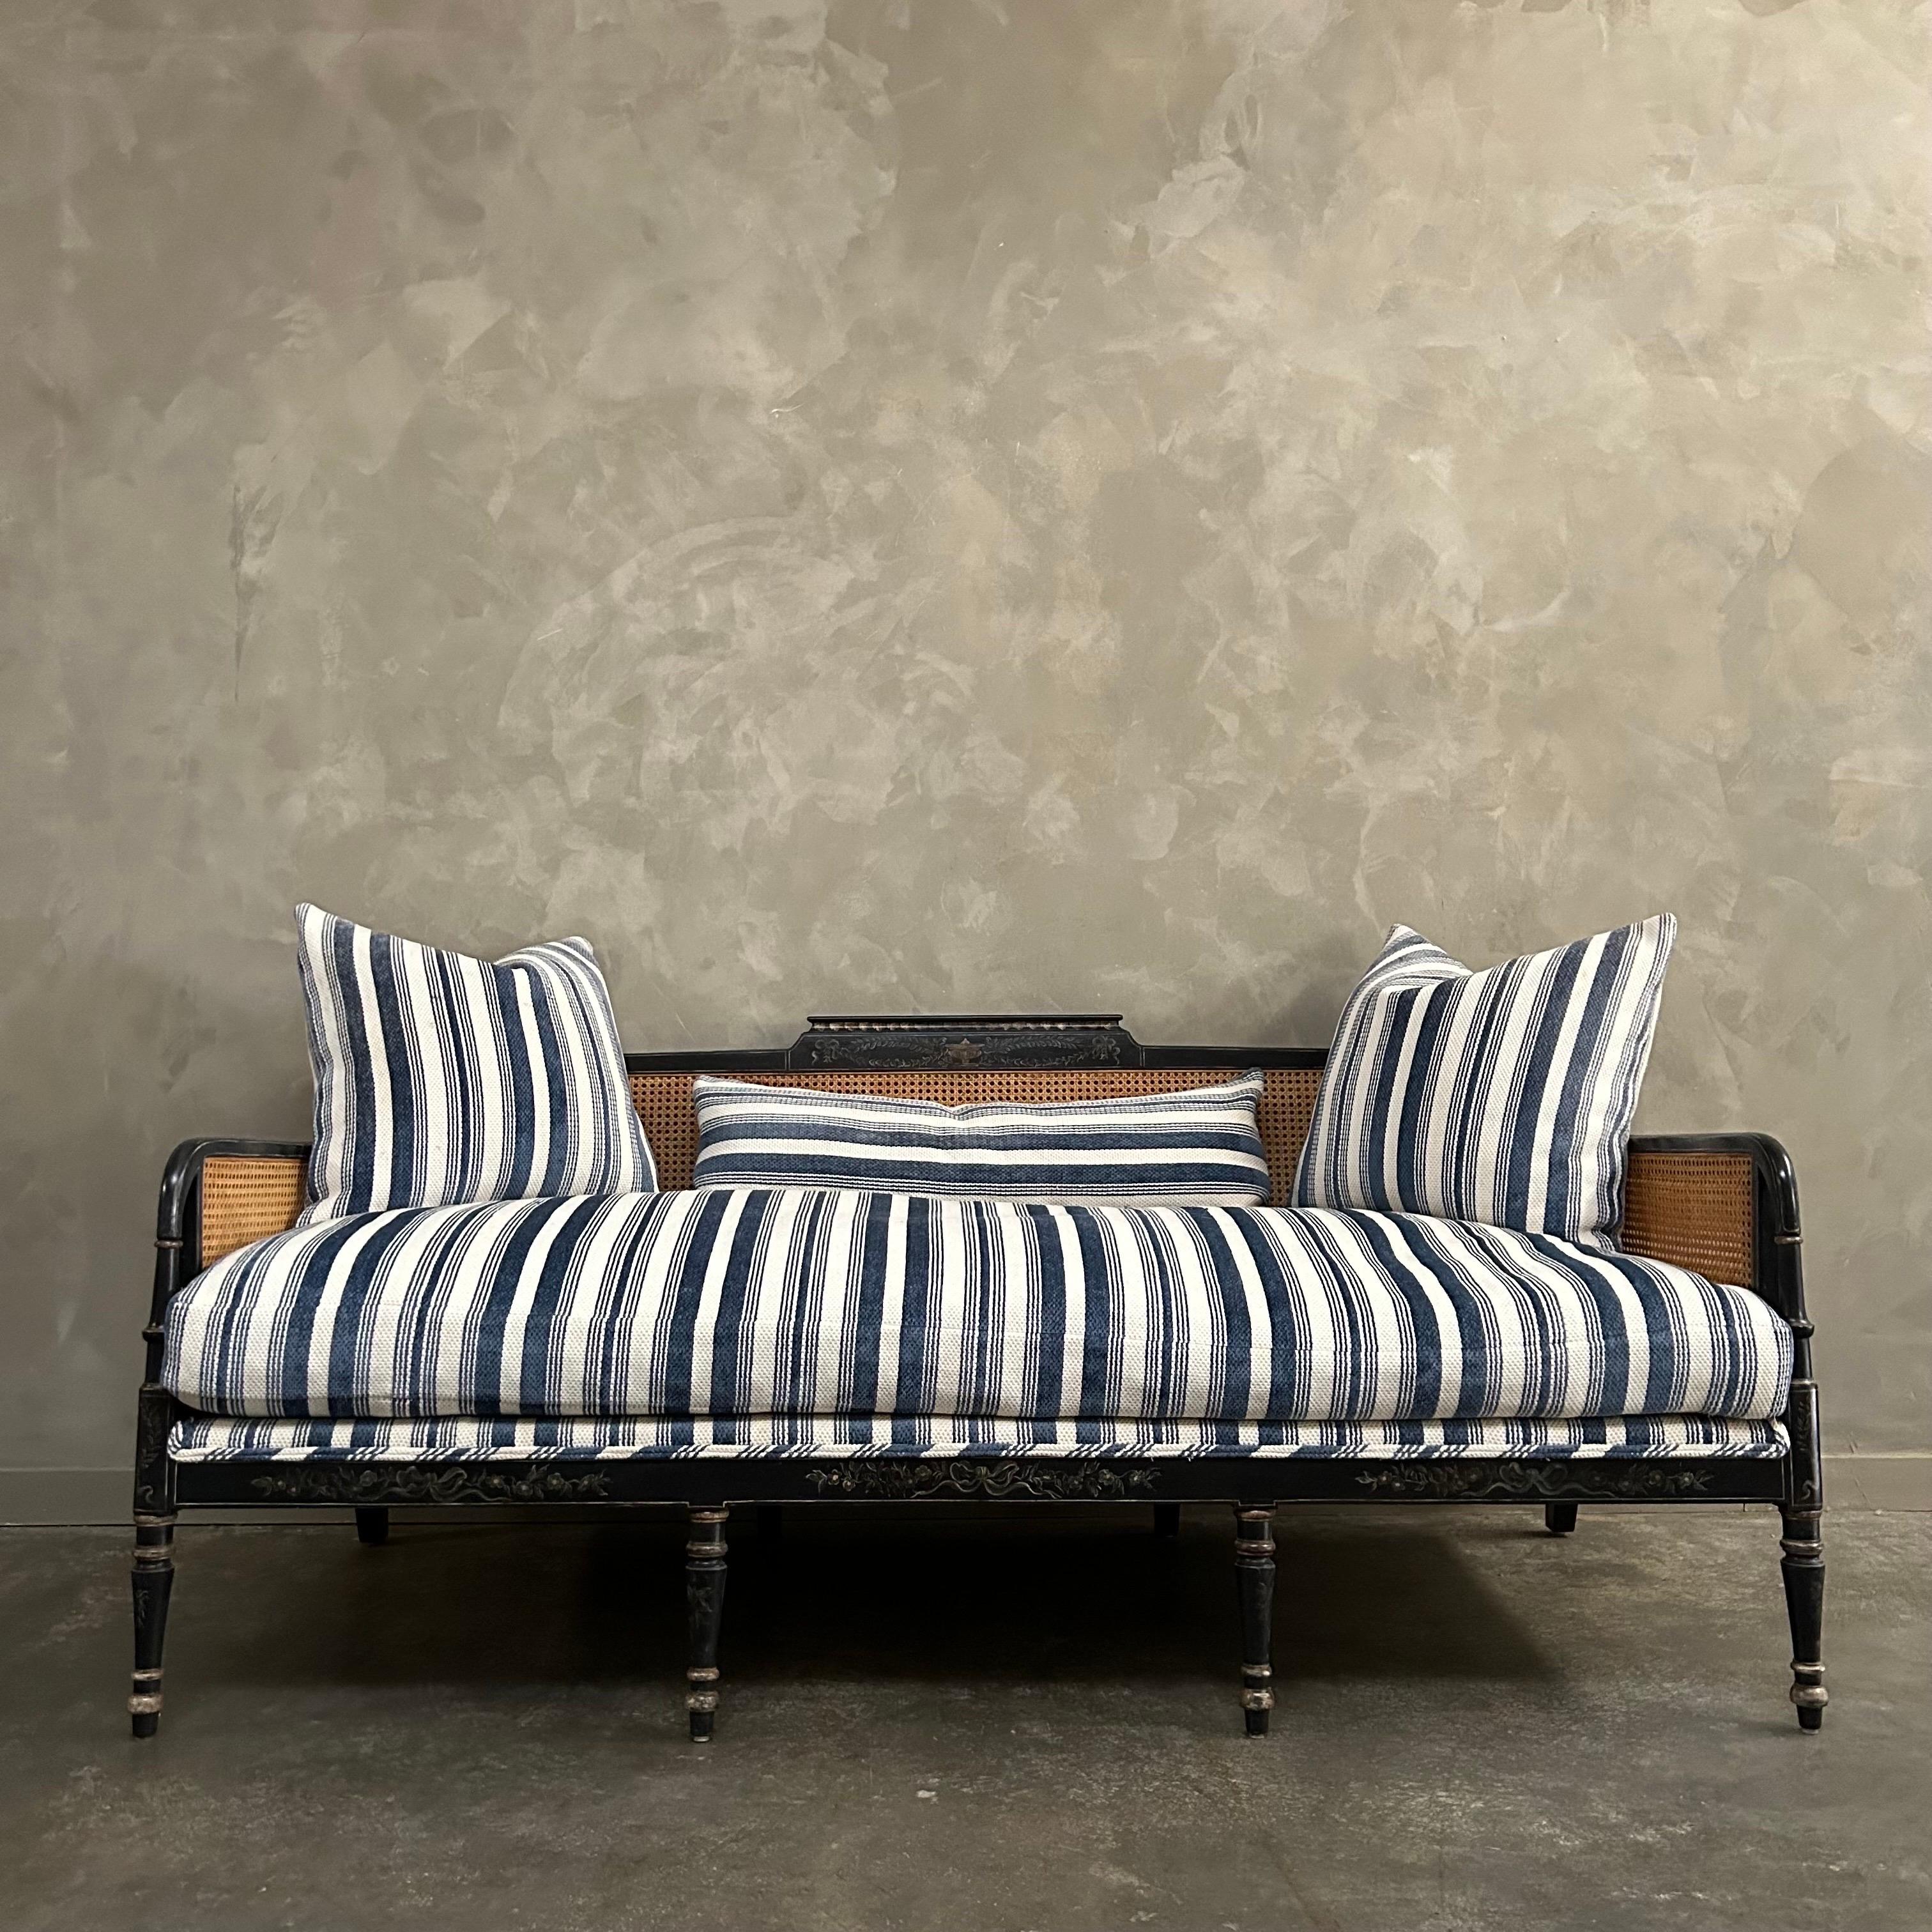 Antique Black Hand Painted Cane Daybed Sofa with Blue Ticking Upholstery For Sale 7